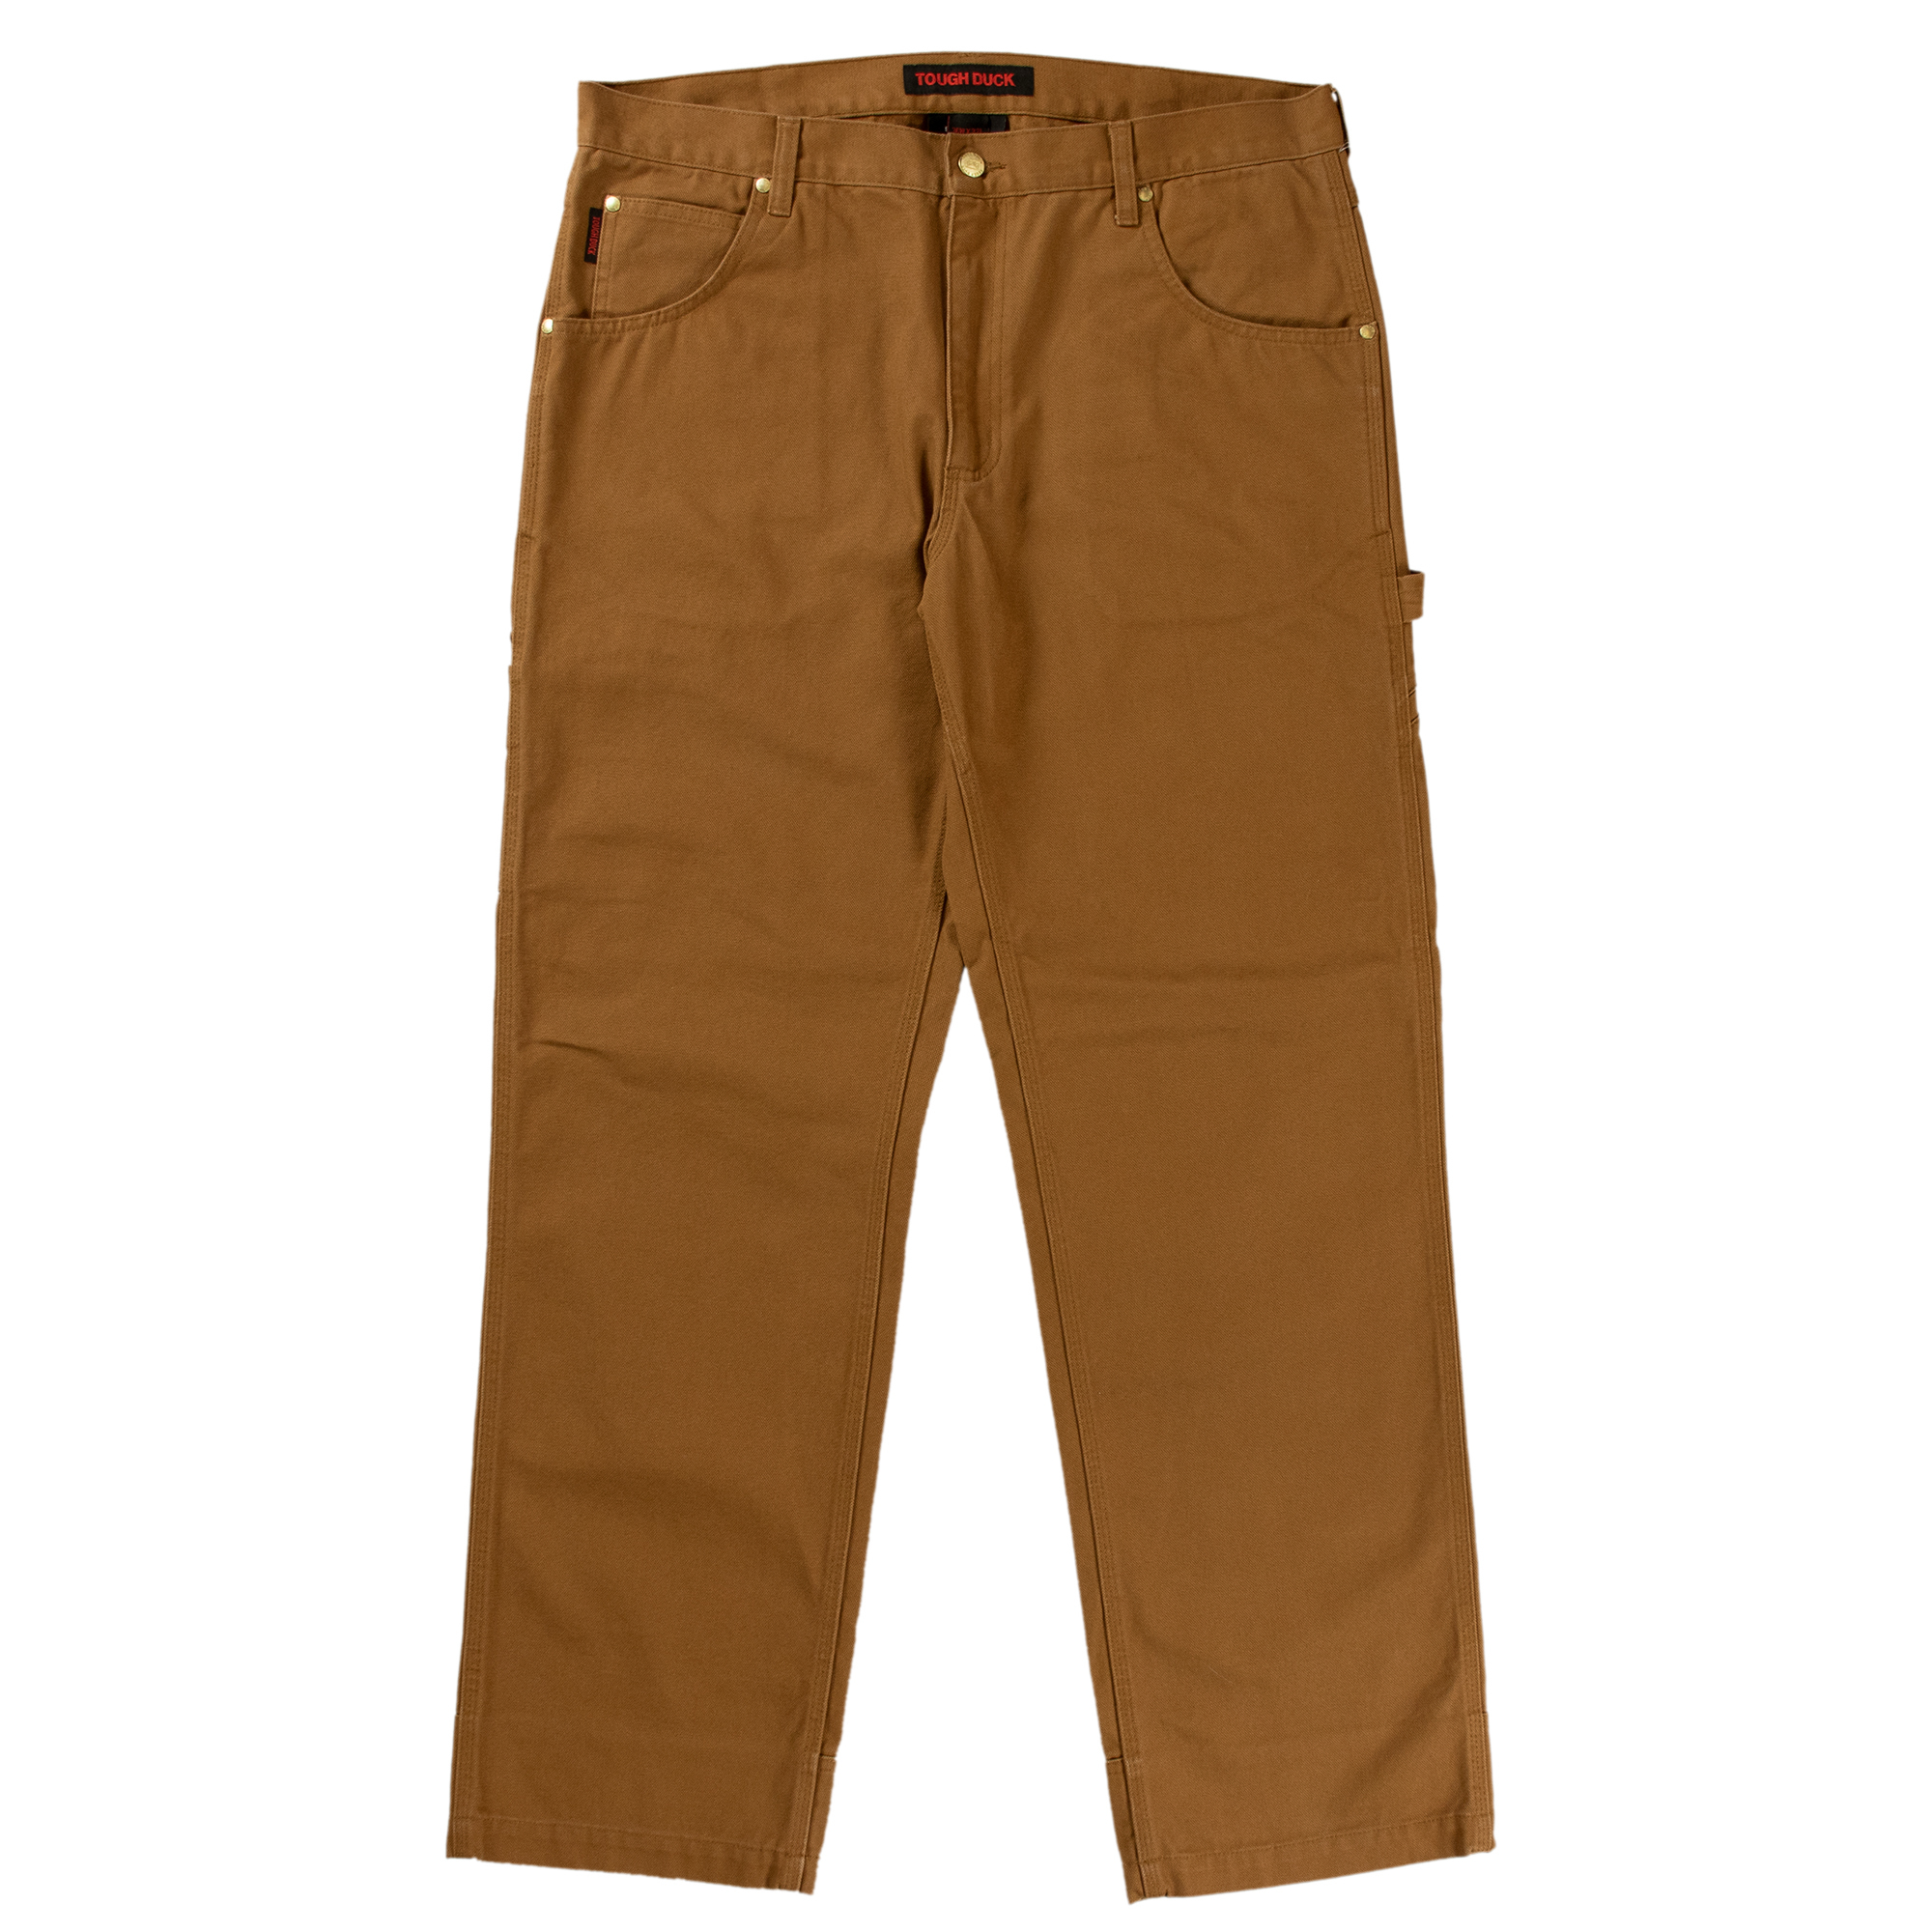 Tough Duck, Washed Duck Pant, Waist 42 in, Inseam 34 in, Color Brown, Model WP023